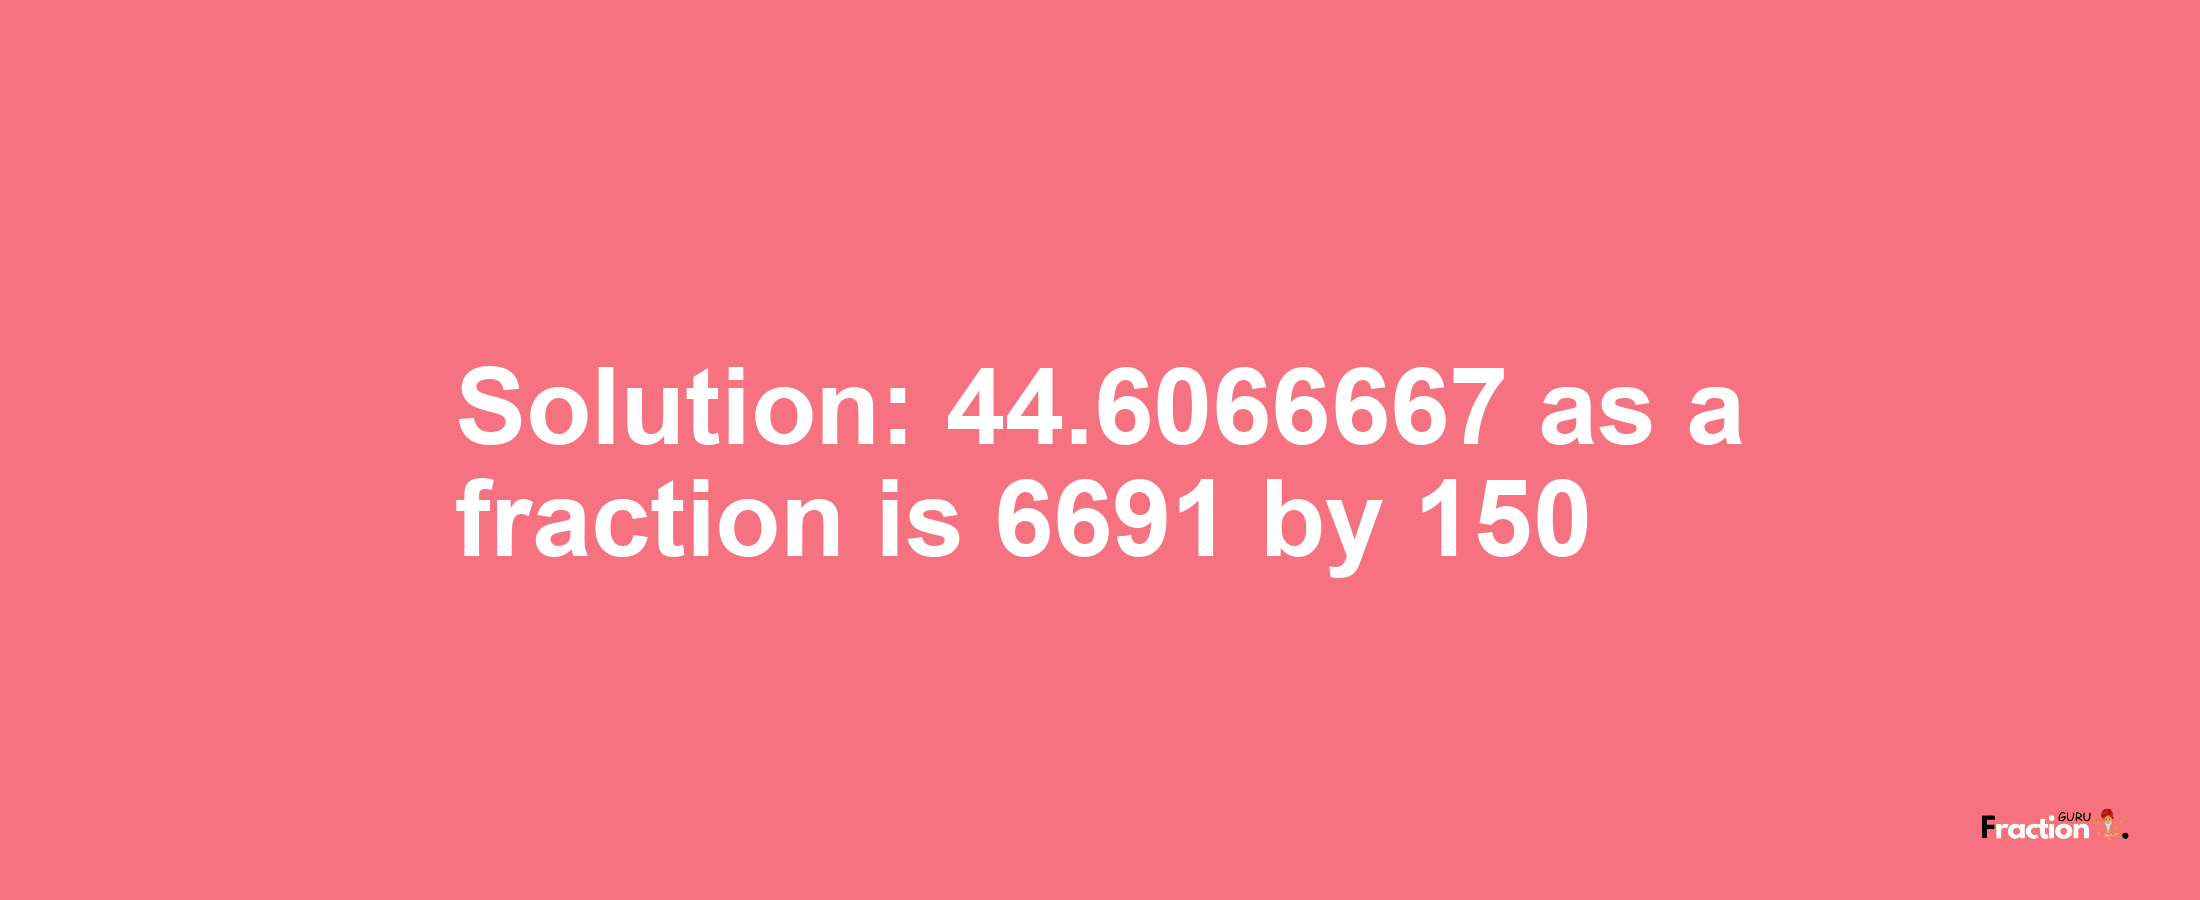 Solution:44.6066667 as a fraction is 6691/150